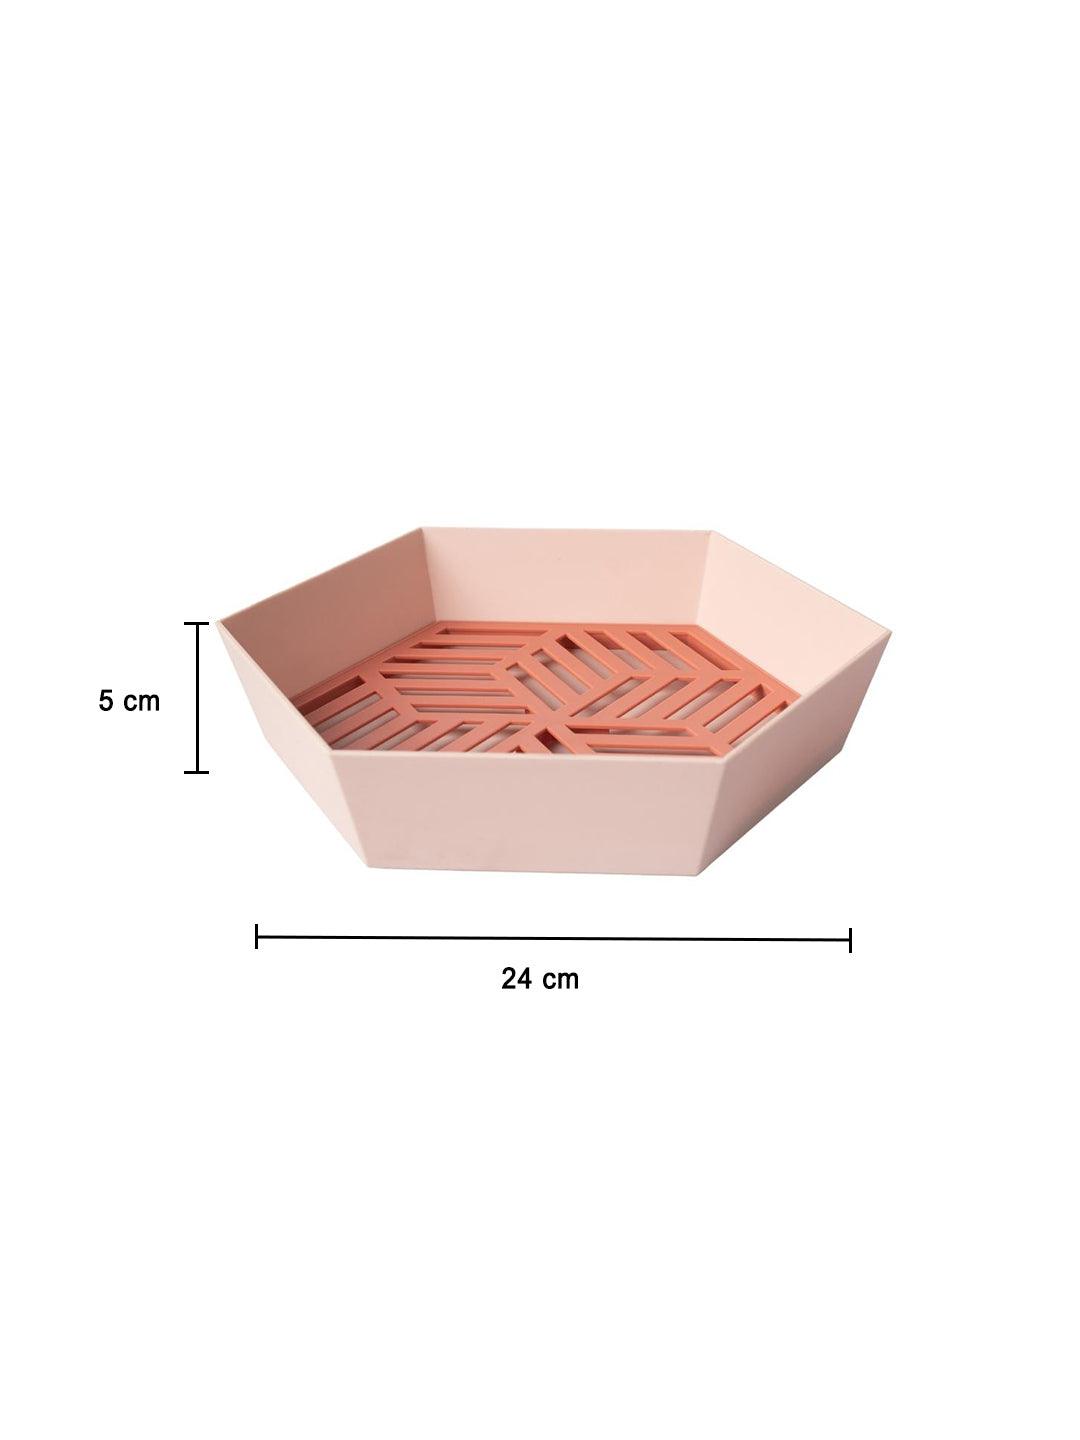 Decorative Geometry Fruit Basket with Removable Drainage Layer - Pink